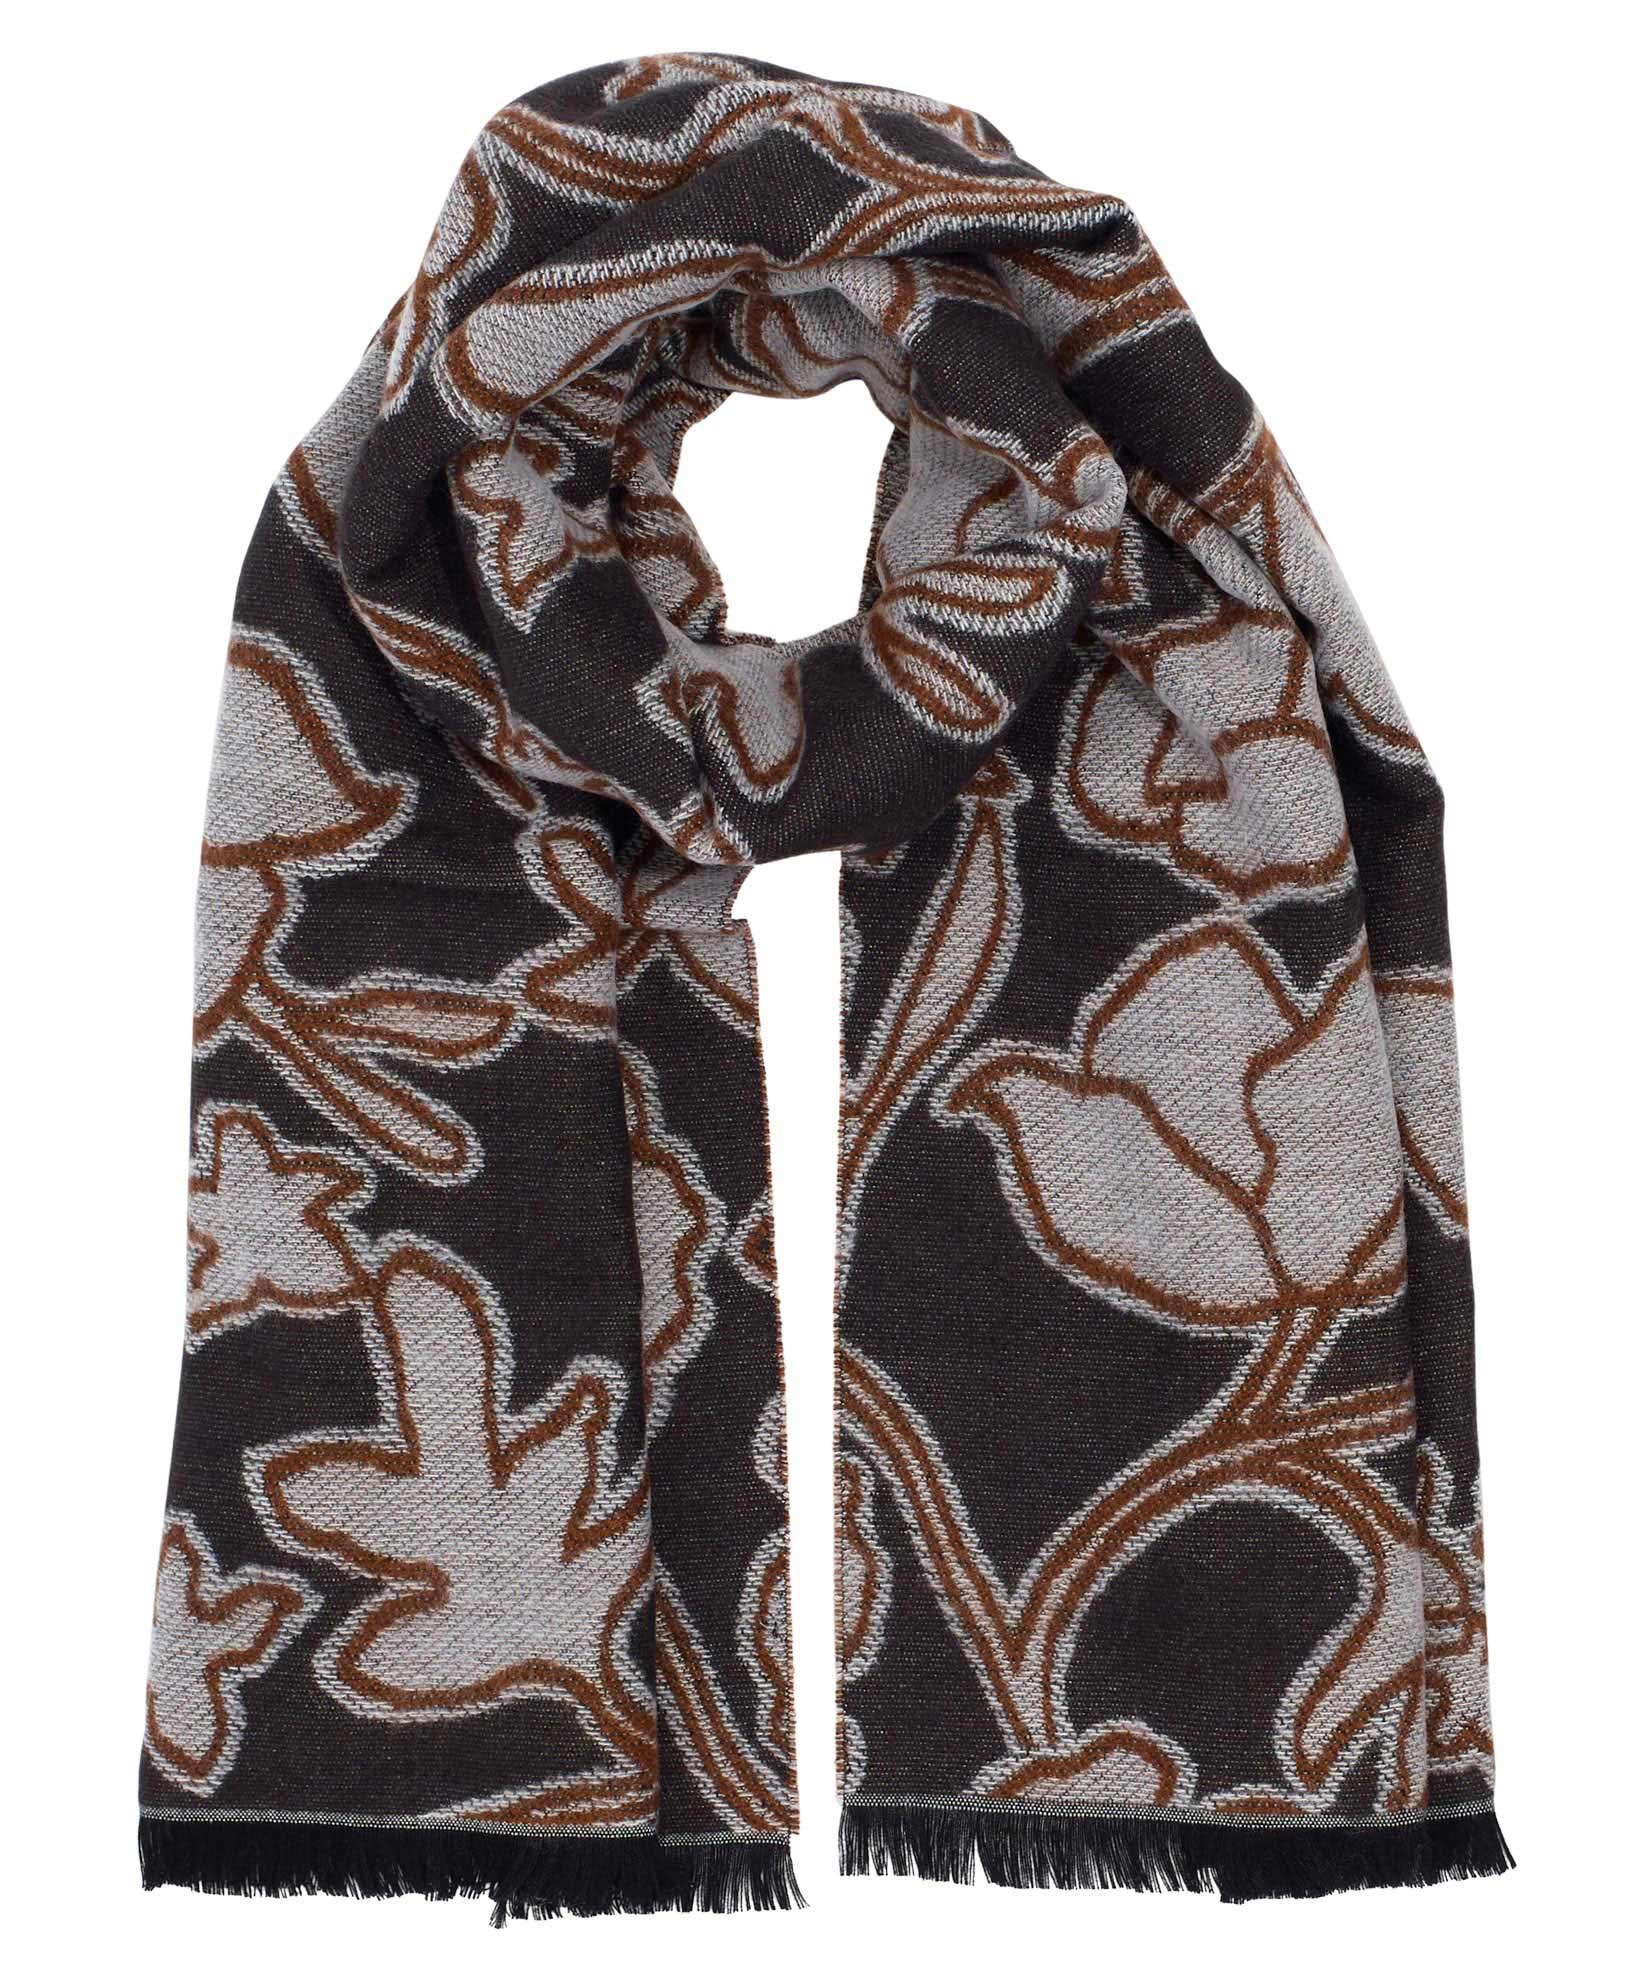 Graphic Floral Jacquard Scarf in color Black